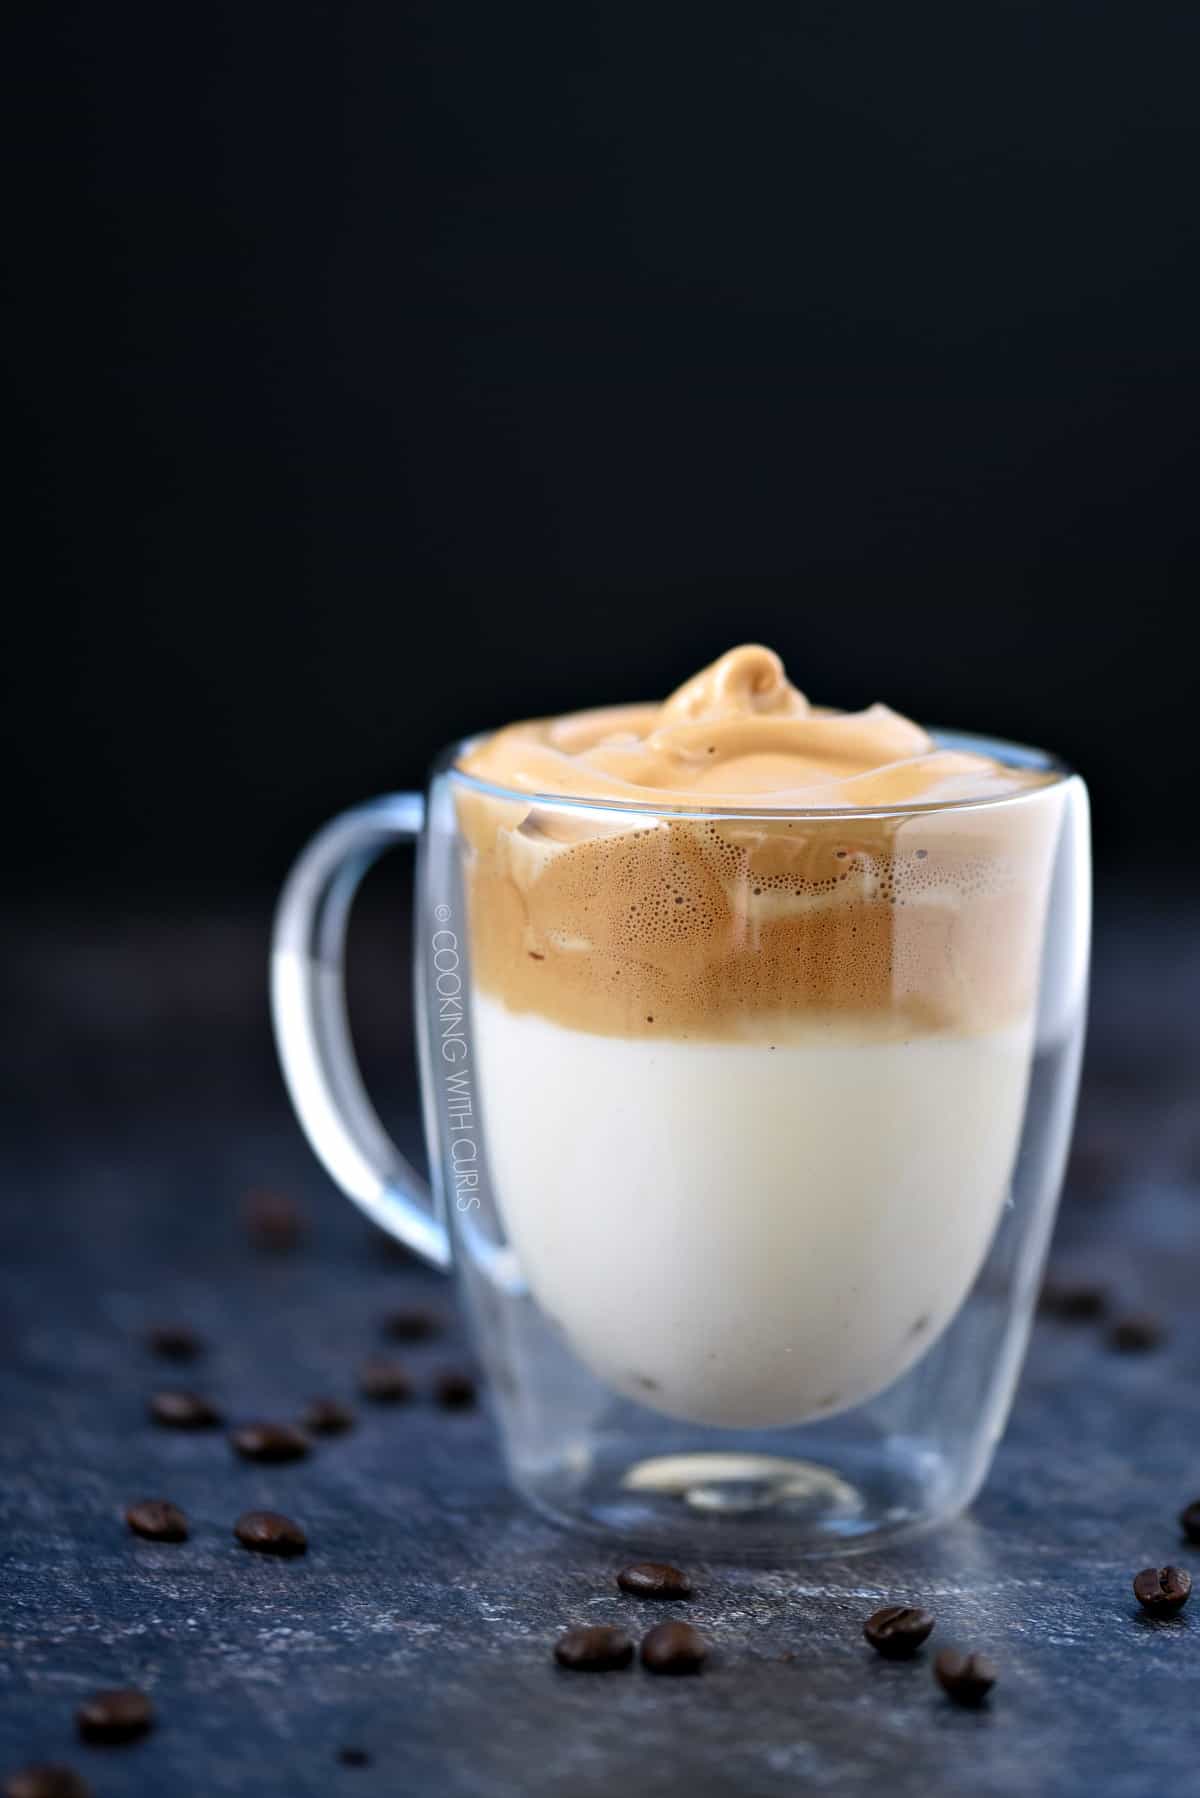 A layer of milk topped with a layer of Whipped Dalgona Coffee in a clear glass mug.